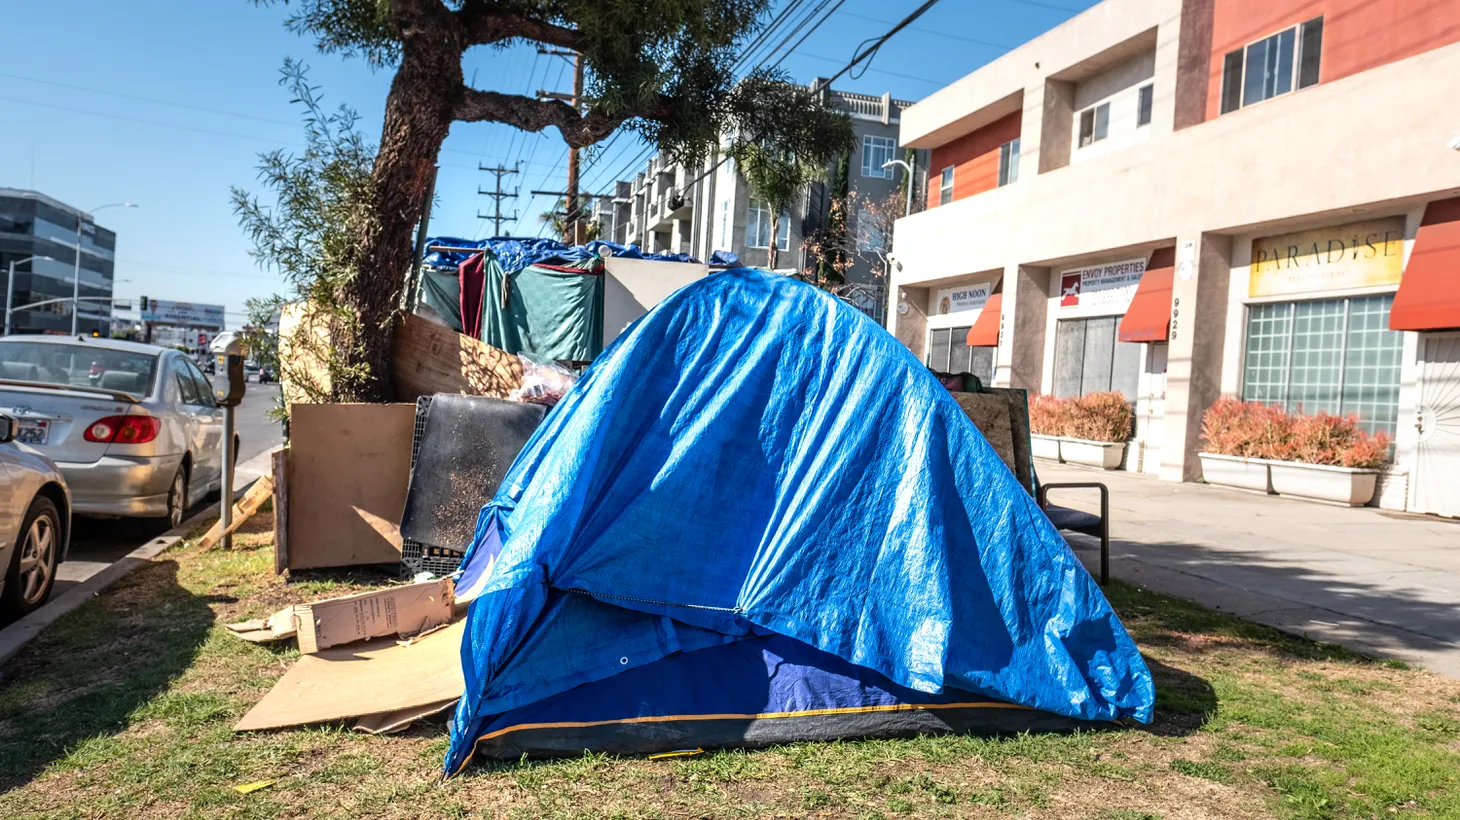 LA City Council voted this week to allow the removal of street encampments like this one at 70 new locations.